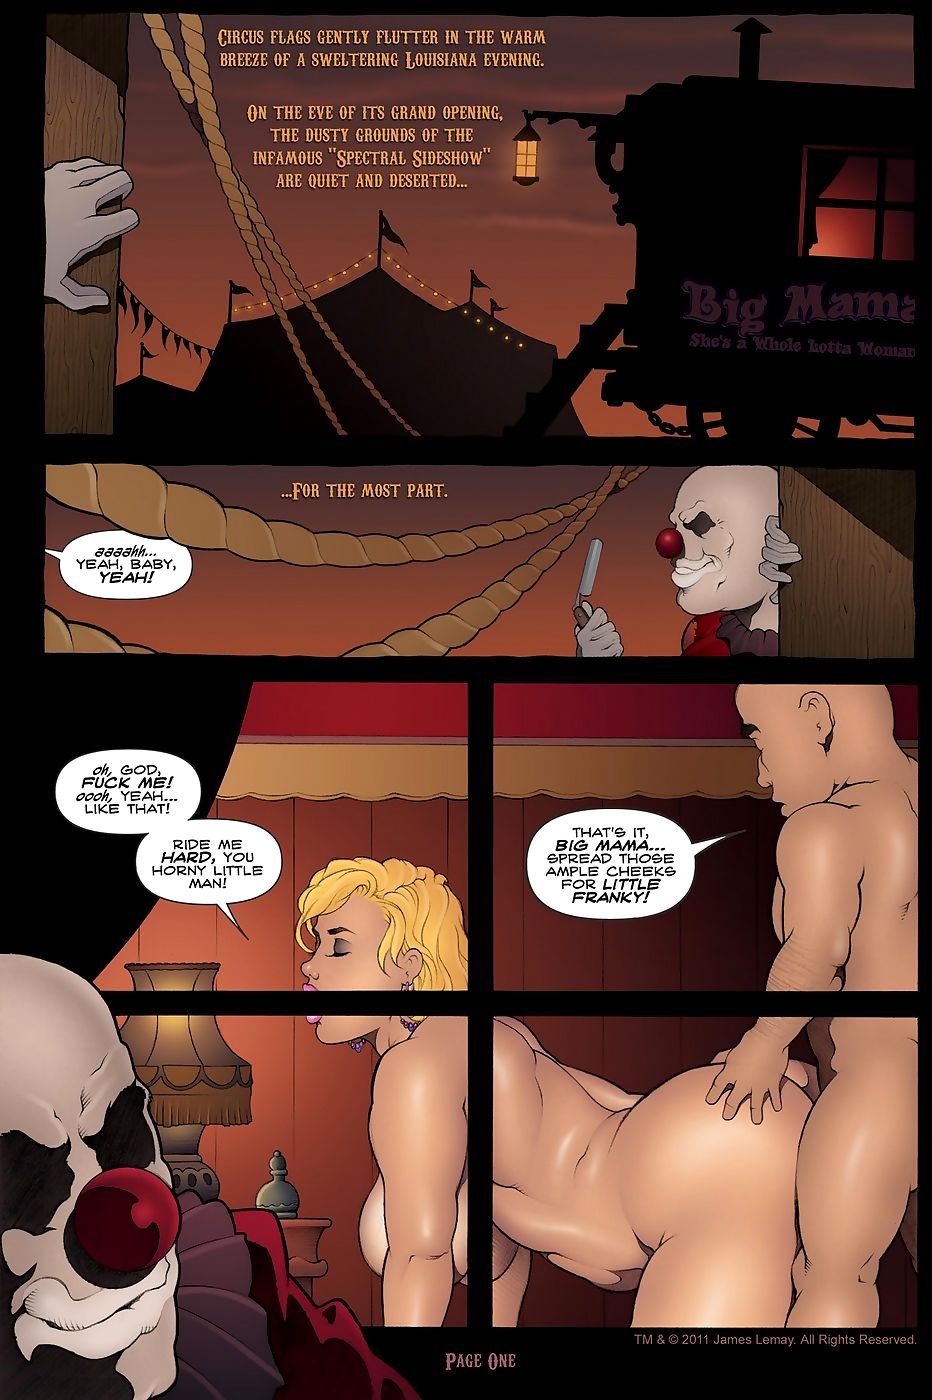 Sideshow Nympho 1 & 3- James Lemay page 1